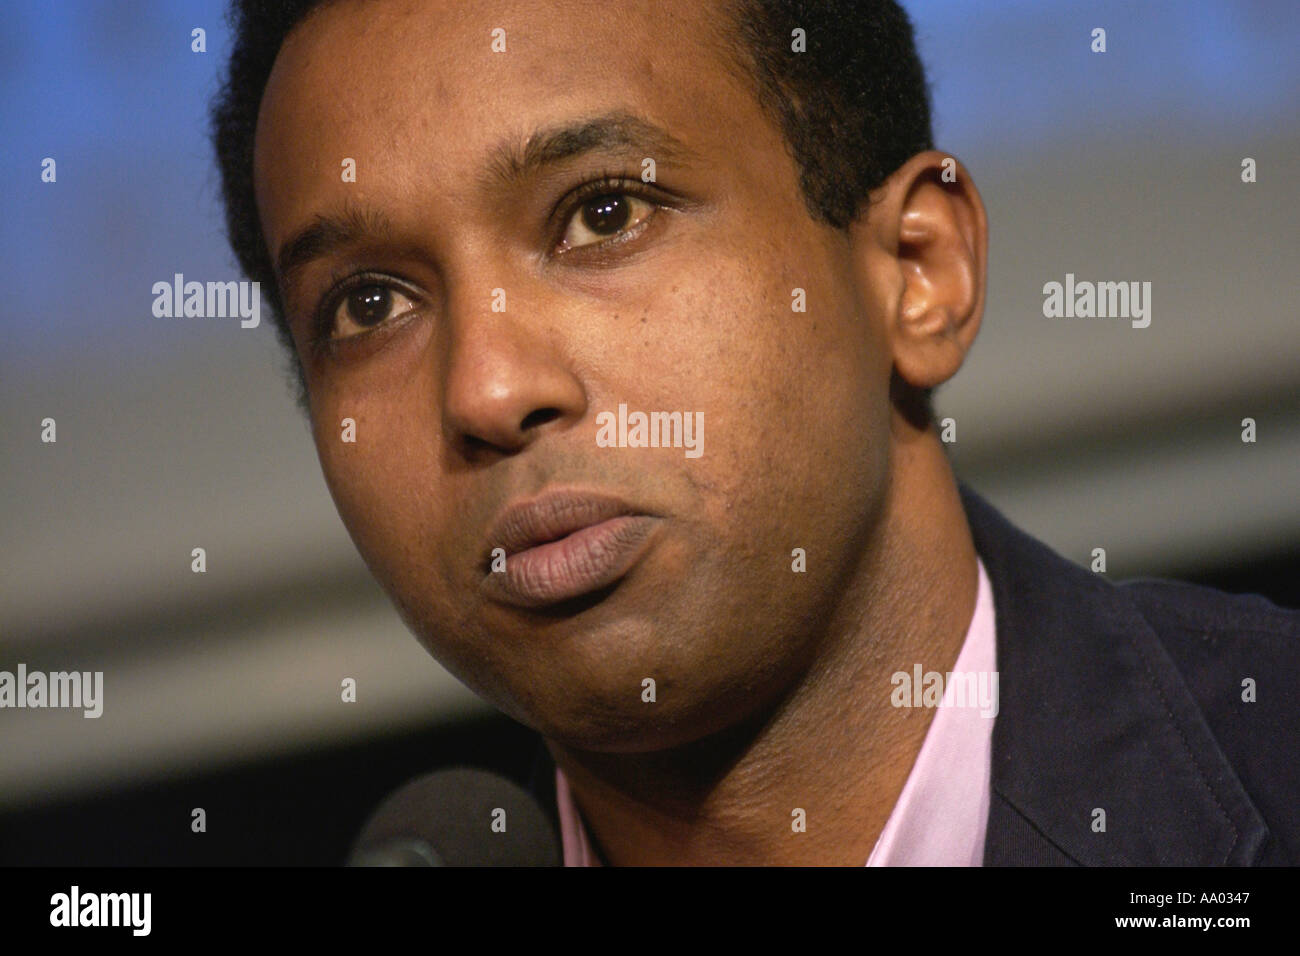 Somali born British broadcast journalist and author Rageh Omaar pictured at Hay Festival 2003 Hay on Wye Powys Wales UK Stock Photo